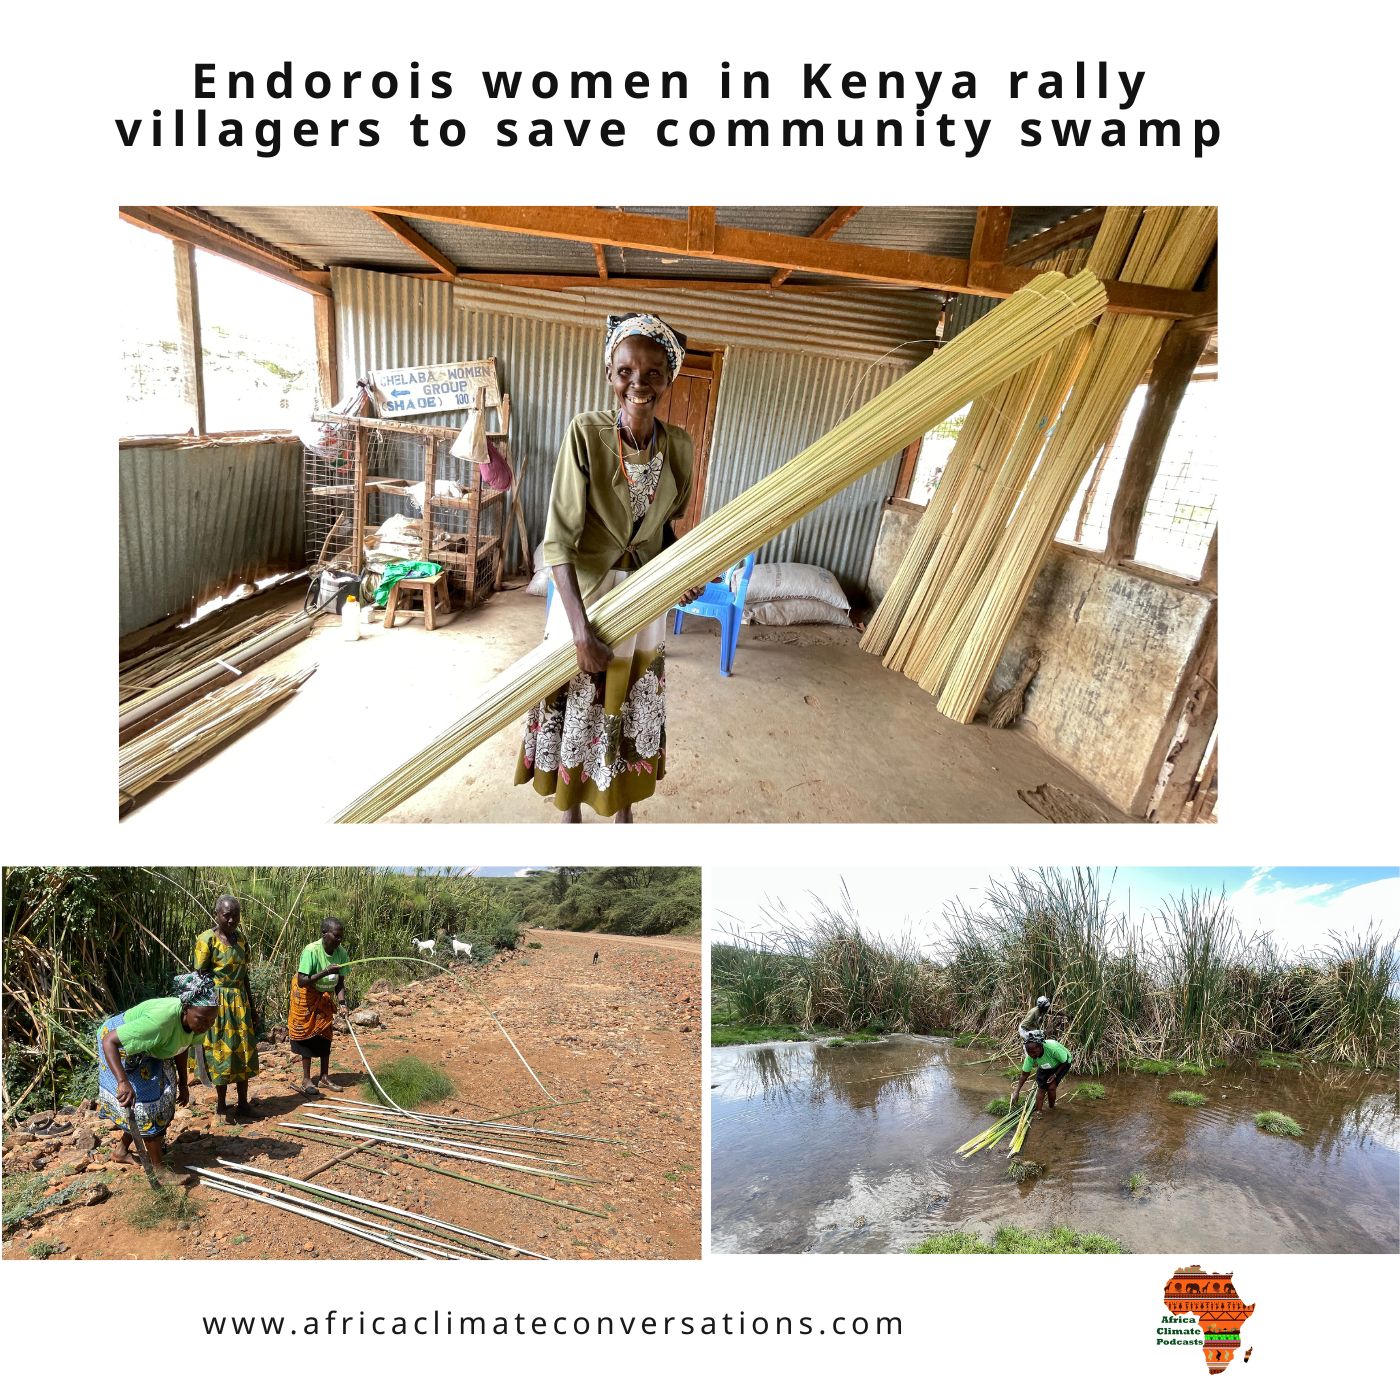 Endorois women in Kenya rally villagers to save community swamp.